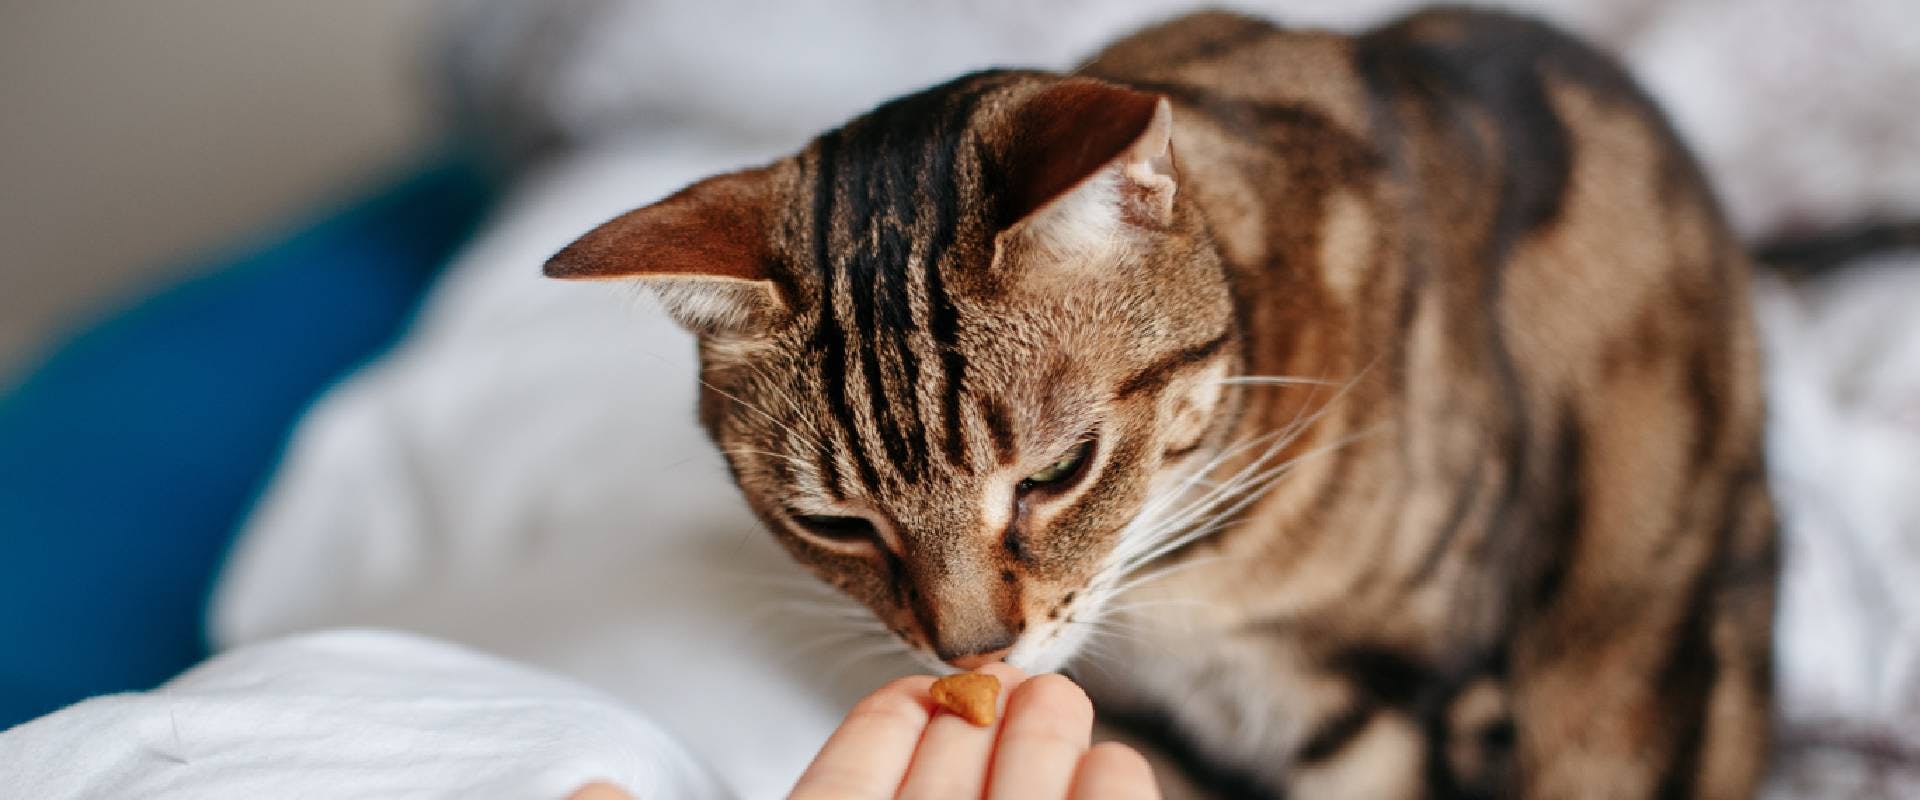 Tabby cat taking a treat from someone's hand